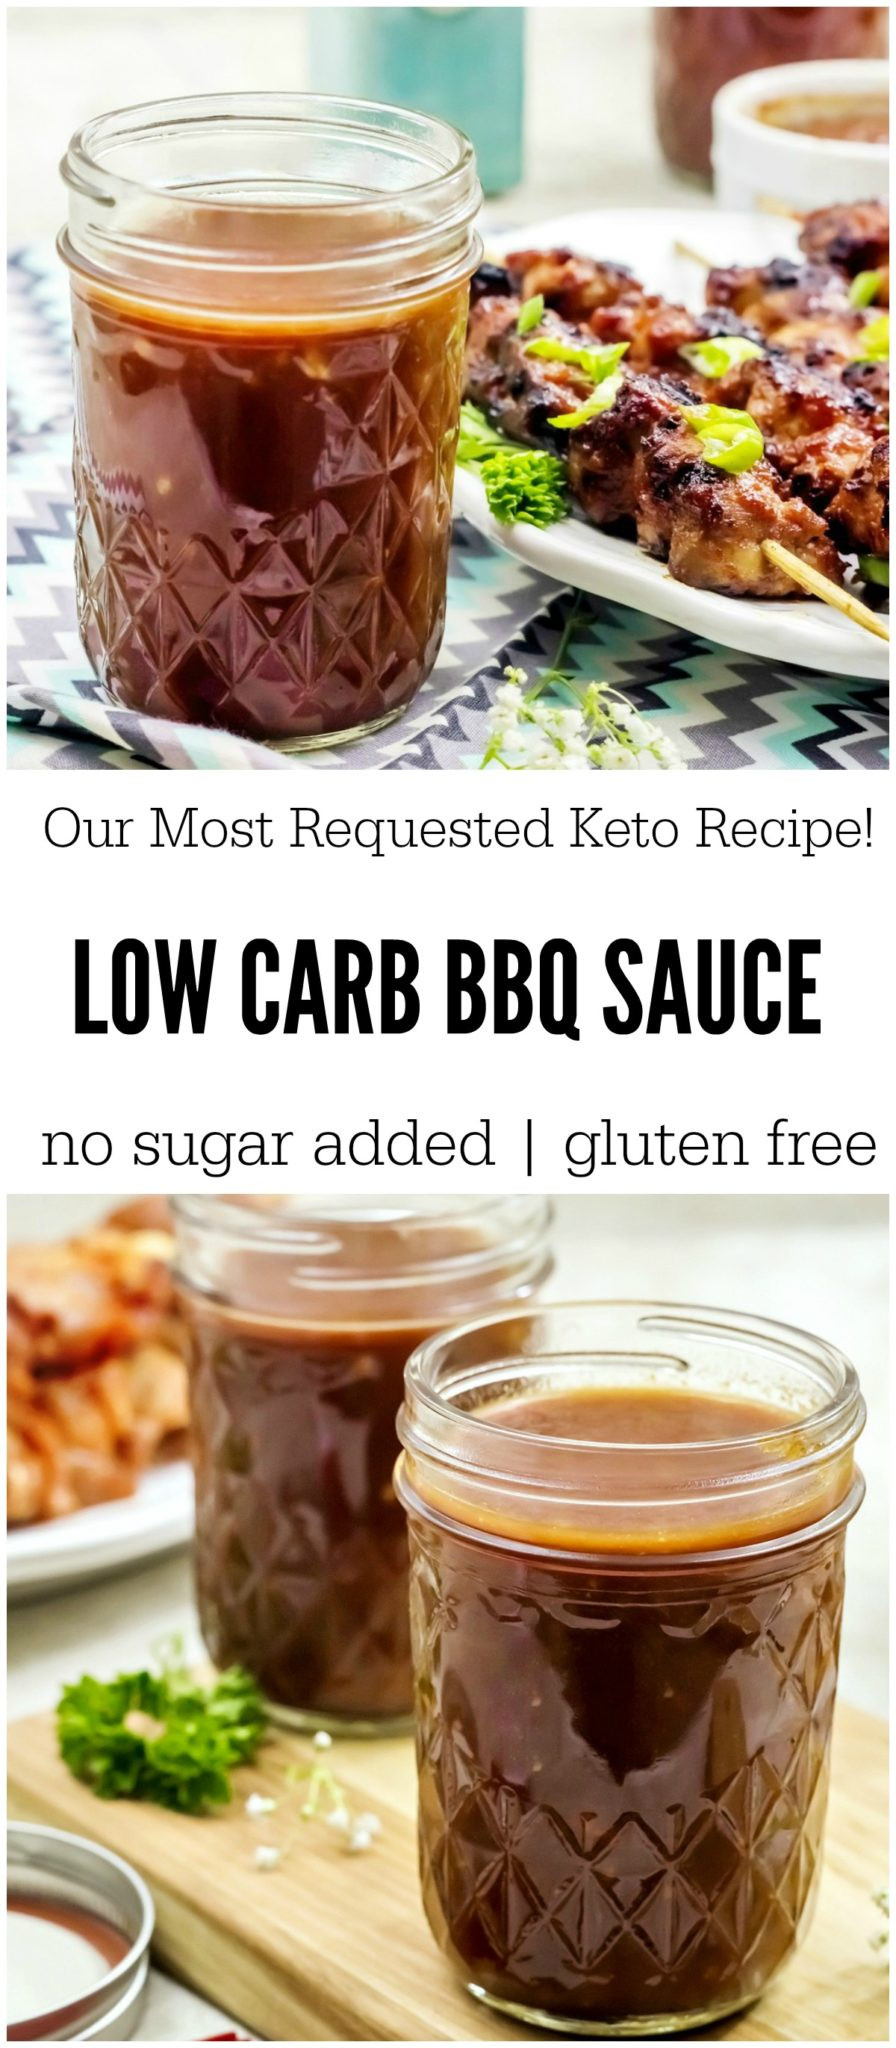 Carbs In Bbq Sauce
 Low Carb BBQ Sauce Our Most Requested Keto Friendly Recipe